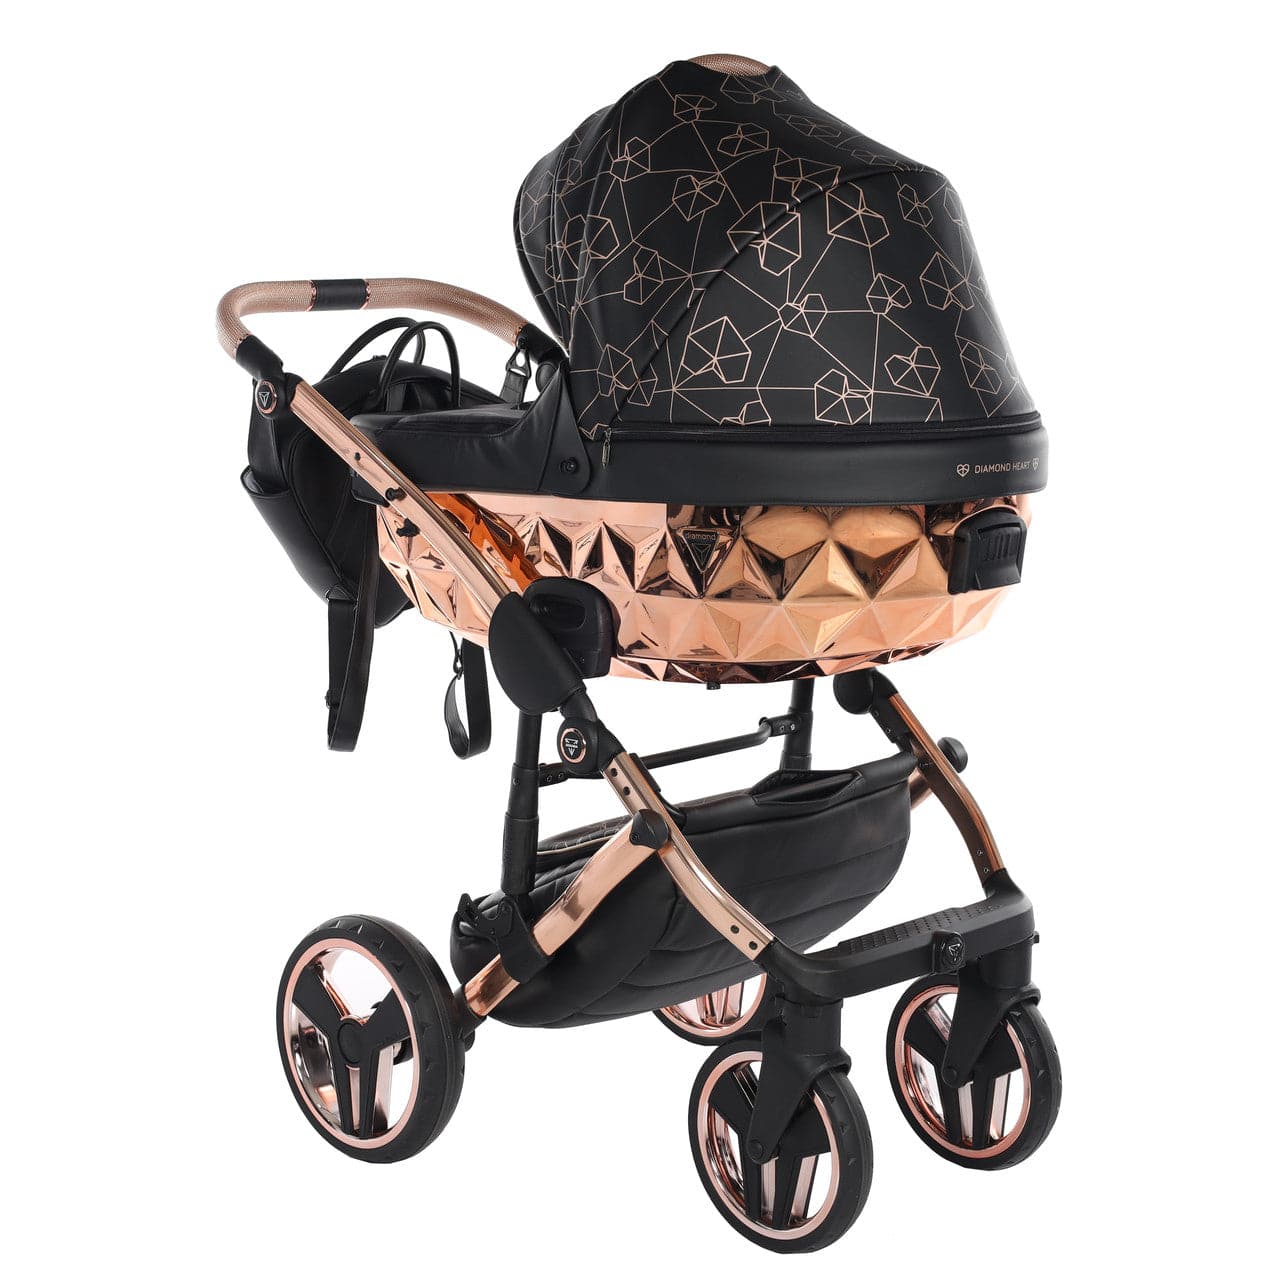 Junama Heart 3 In 1 Travel System - Black - For Your Little One